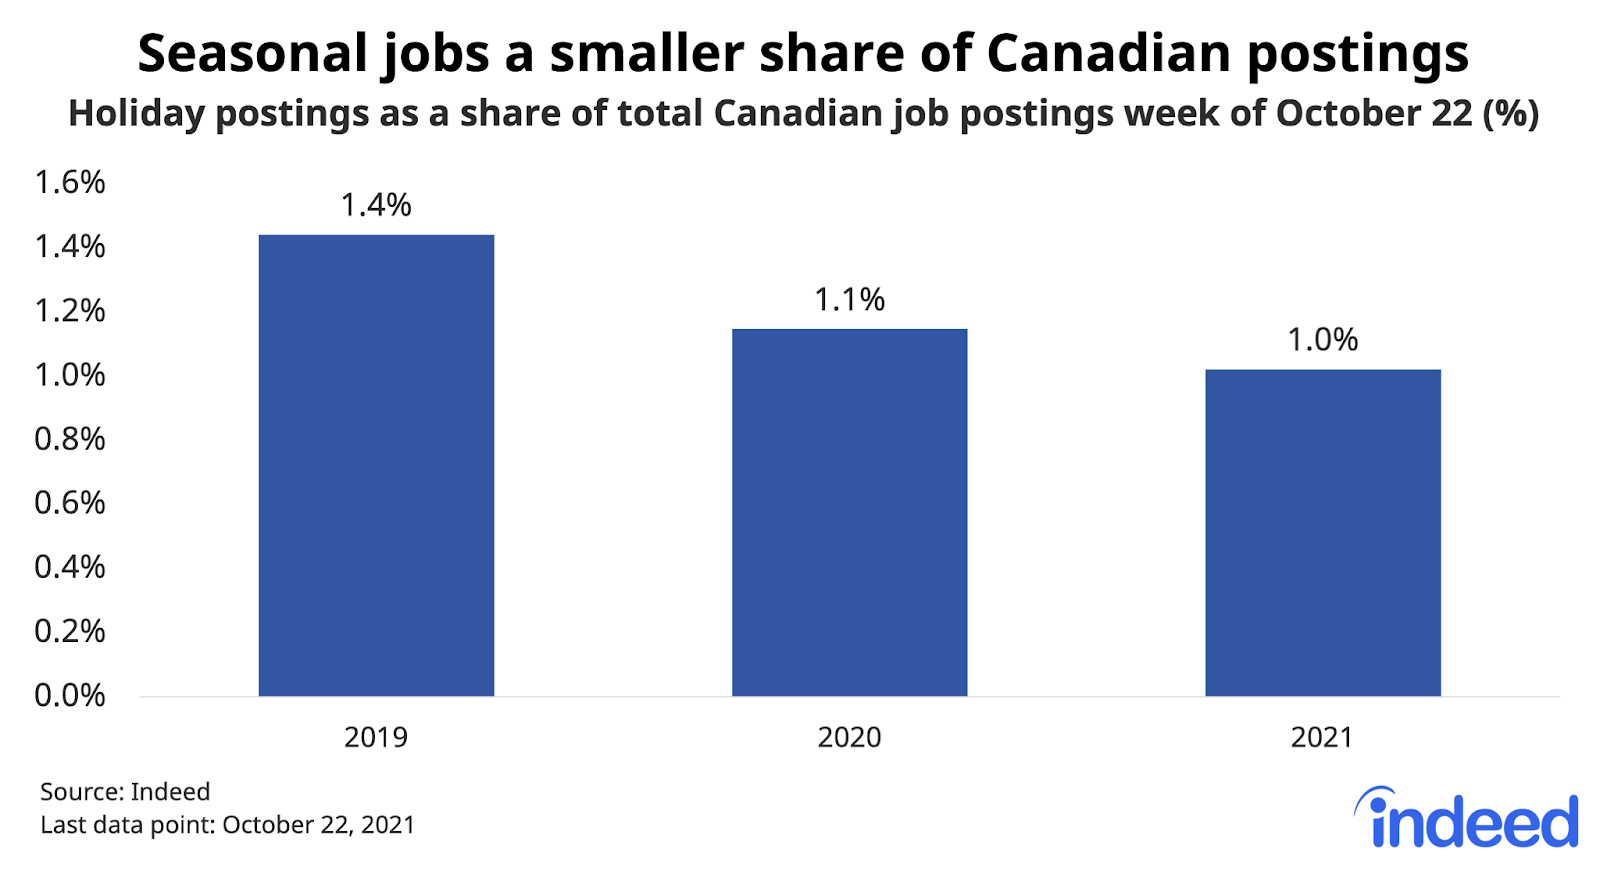 Bar chart titled “Seasonal jobs a smaller share of Canadian postings.”